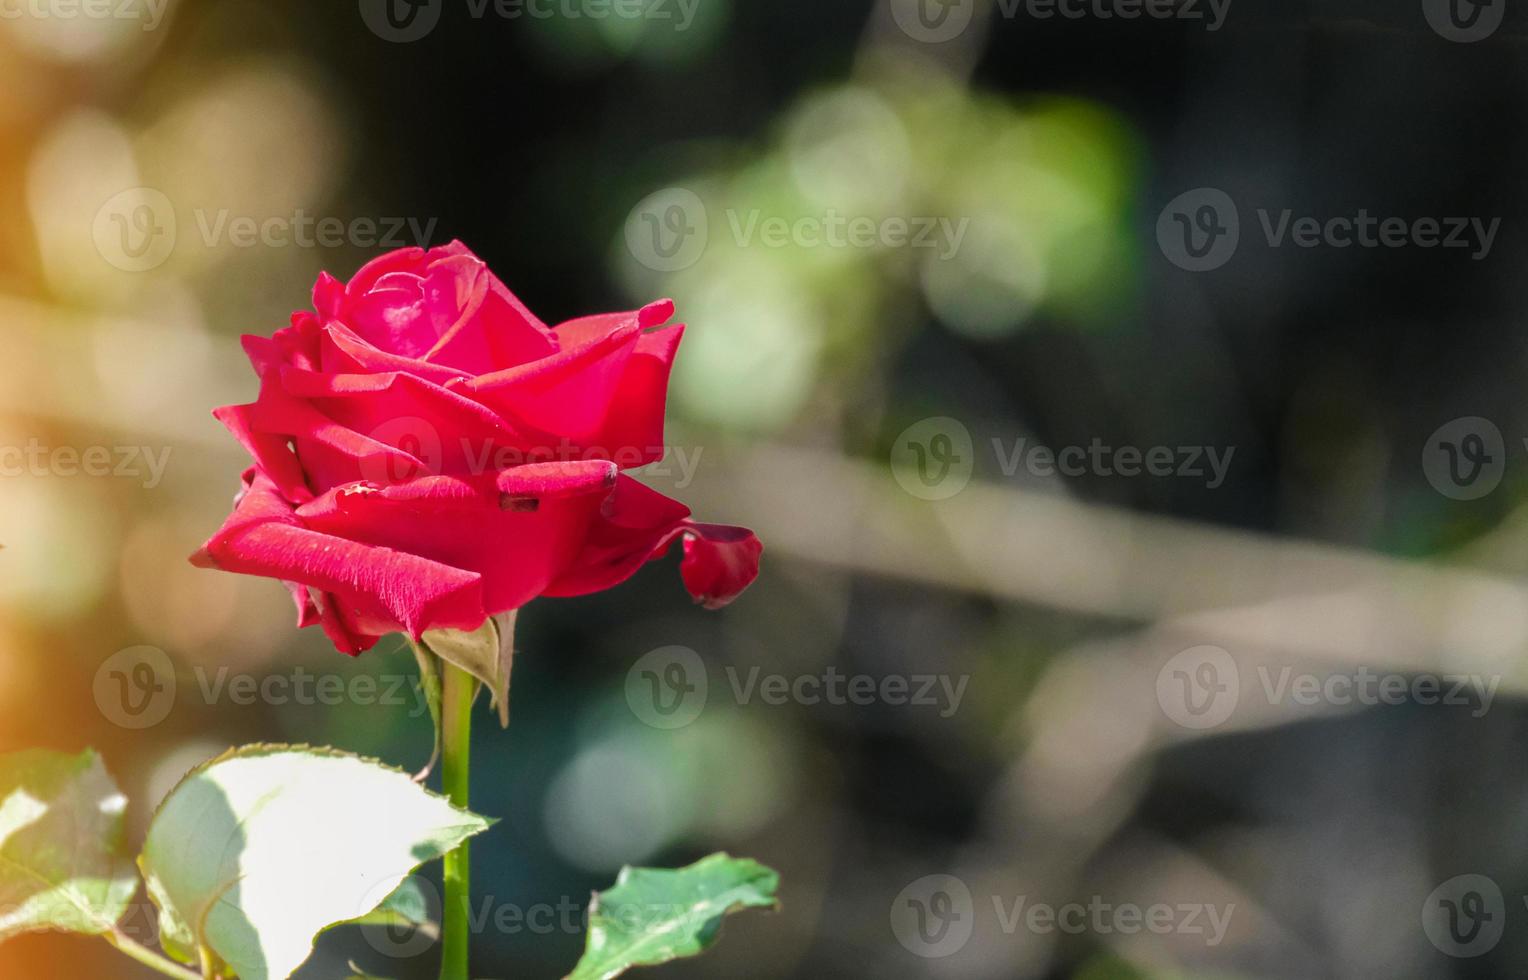 beauty soft bloom red rose multi petals abstract shape with green leaves in botany garden. symbol of love in valentine day. soft fragrant aroma flora. photo